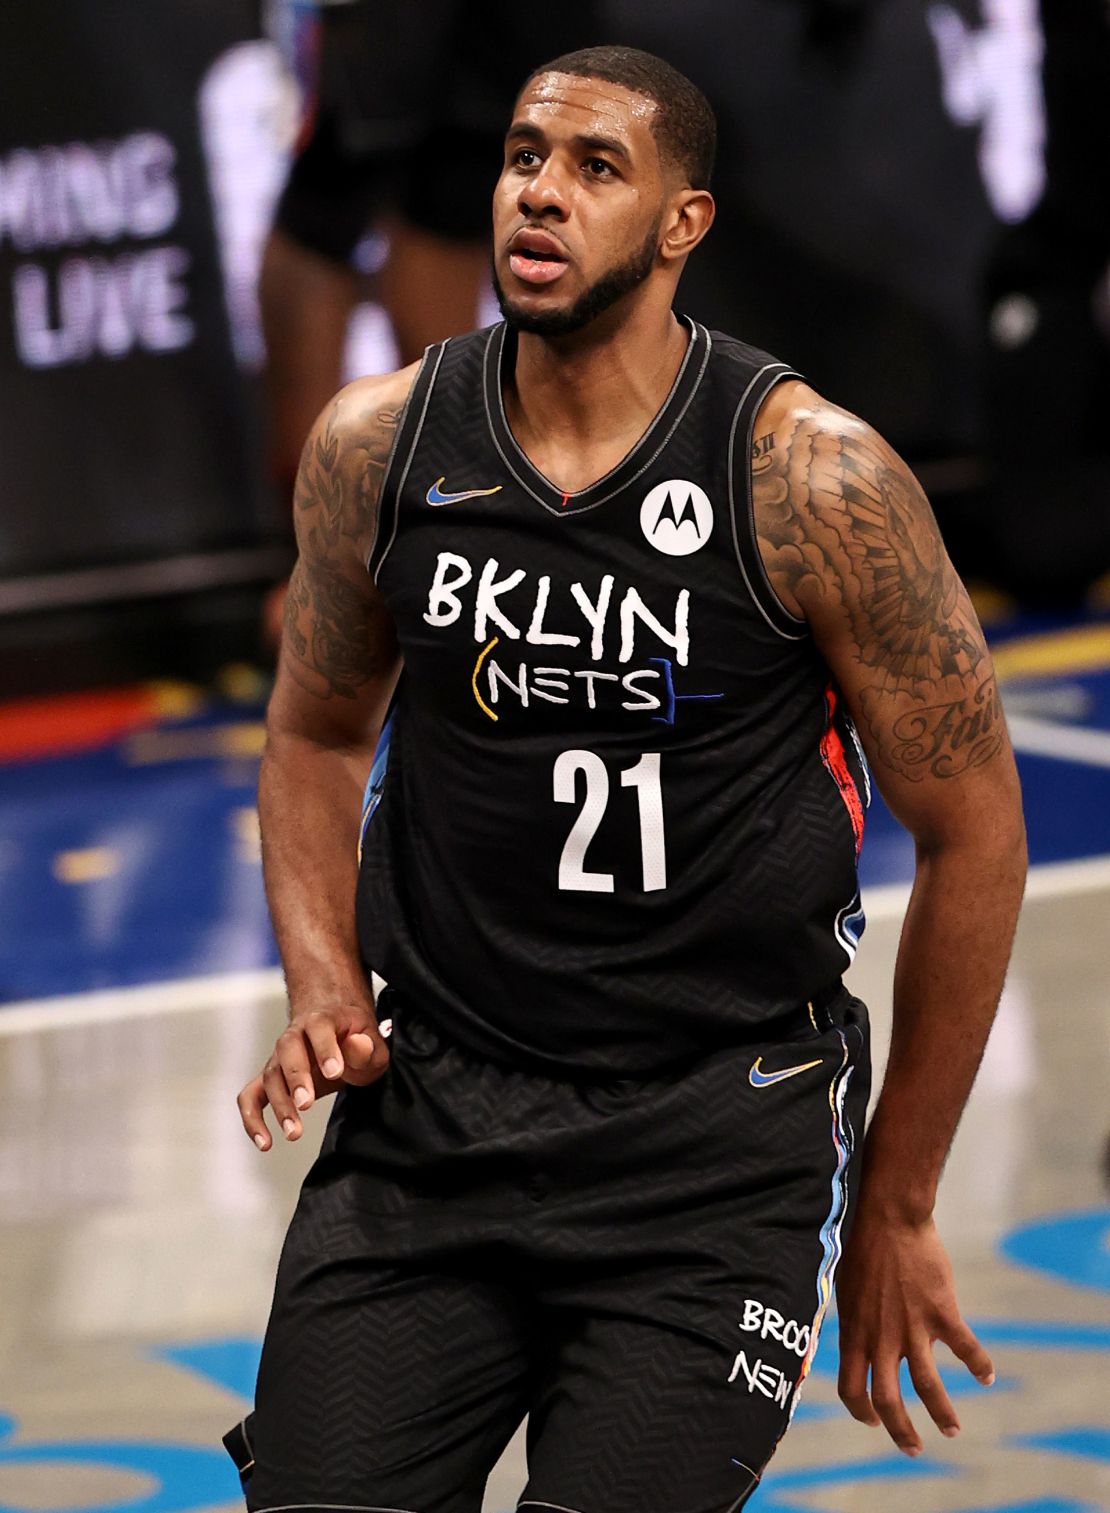 Nets' LaMarcus Aldridge watches his shot during his last game in the NBA, against the LA Lakers.